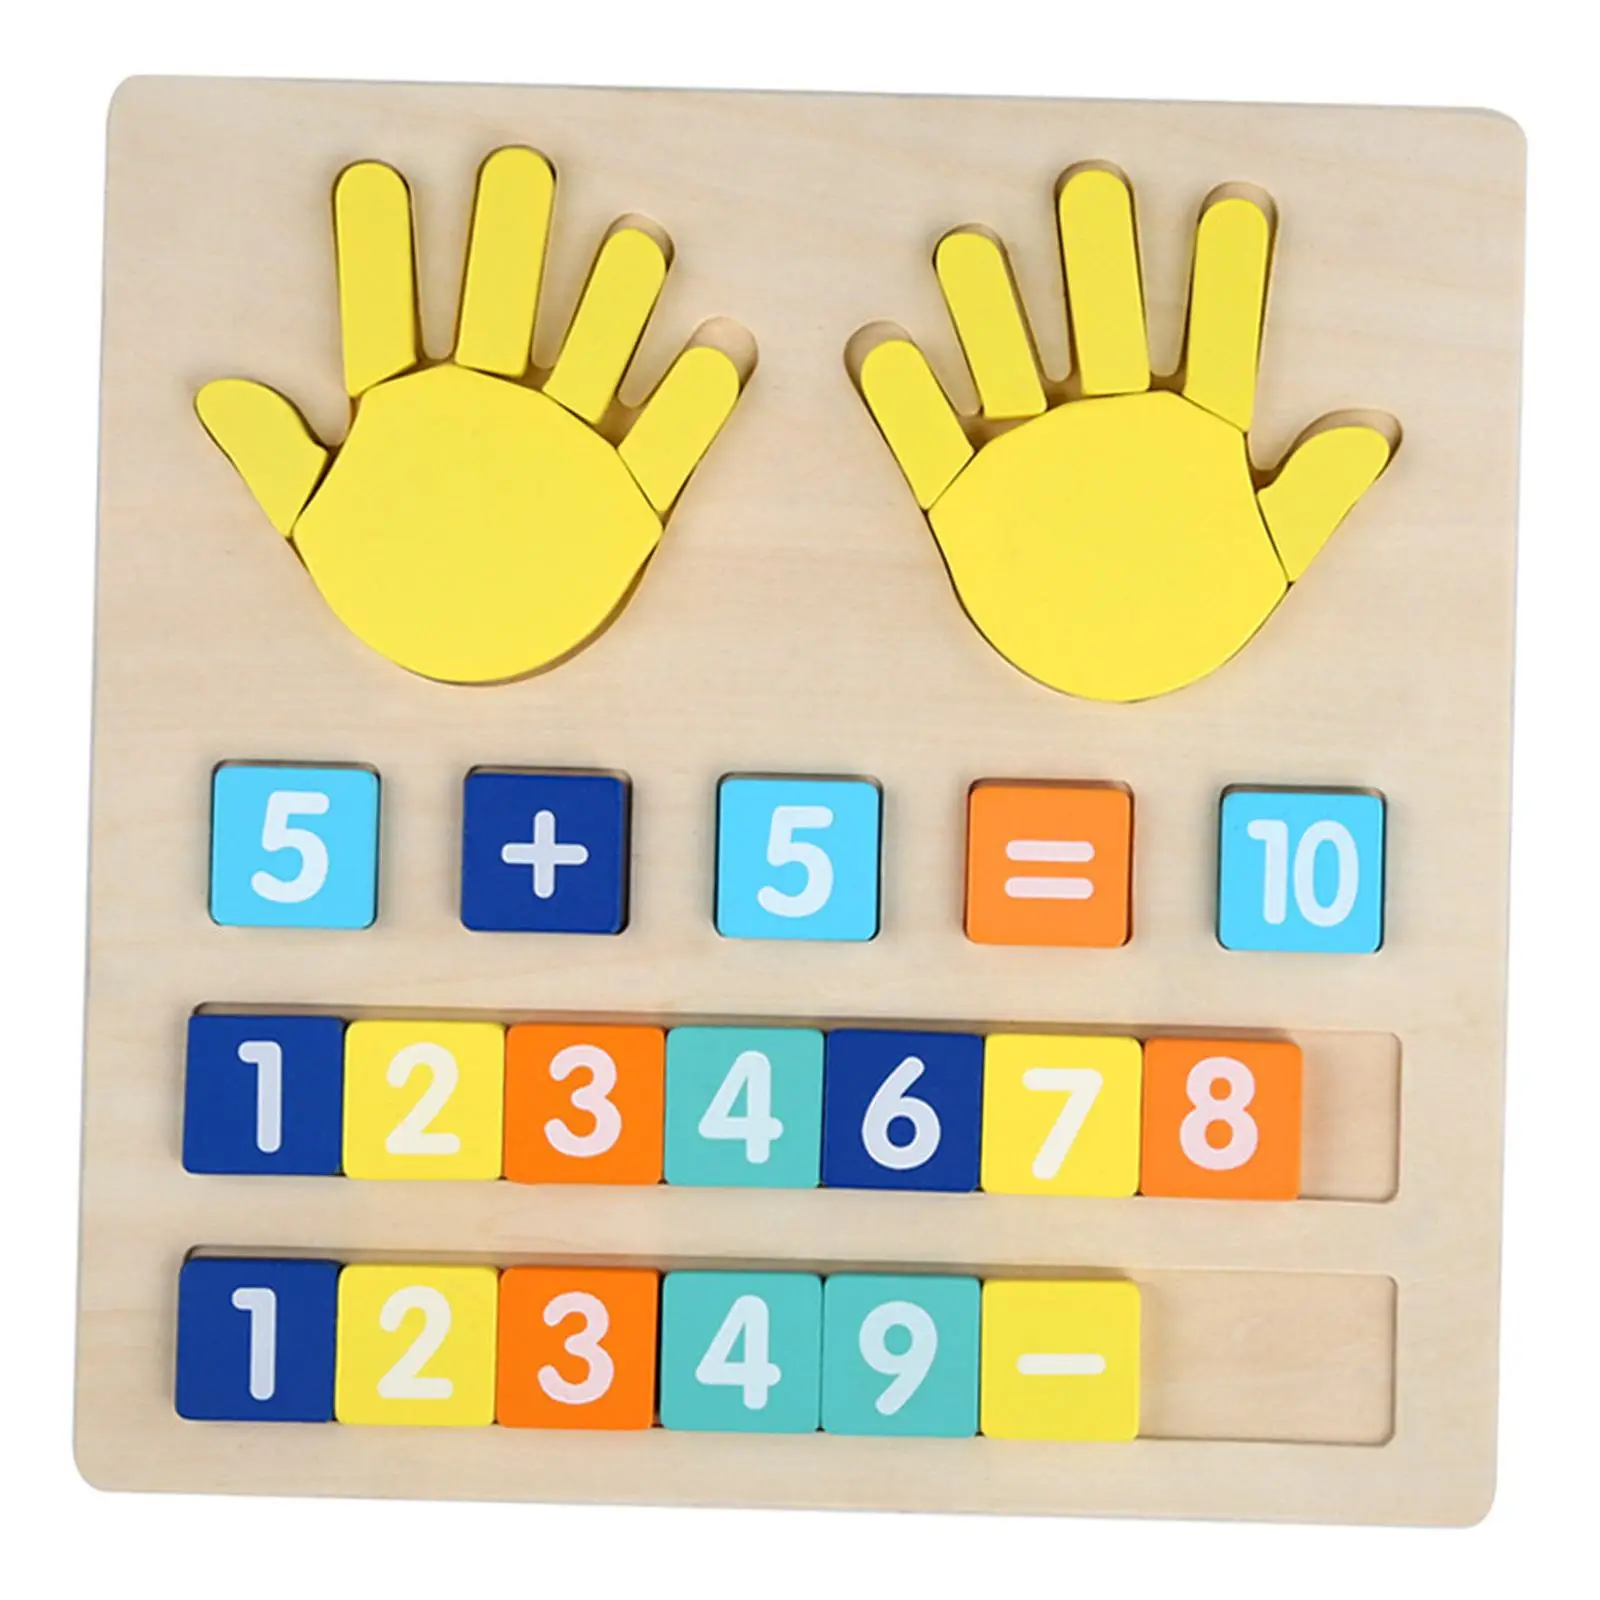 Finger Numbers Counting Toy Educational Learning Montessori Mathematics Busy Board for Cognitive Development Gift Home Preschool